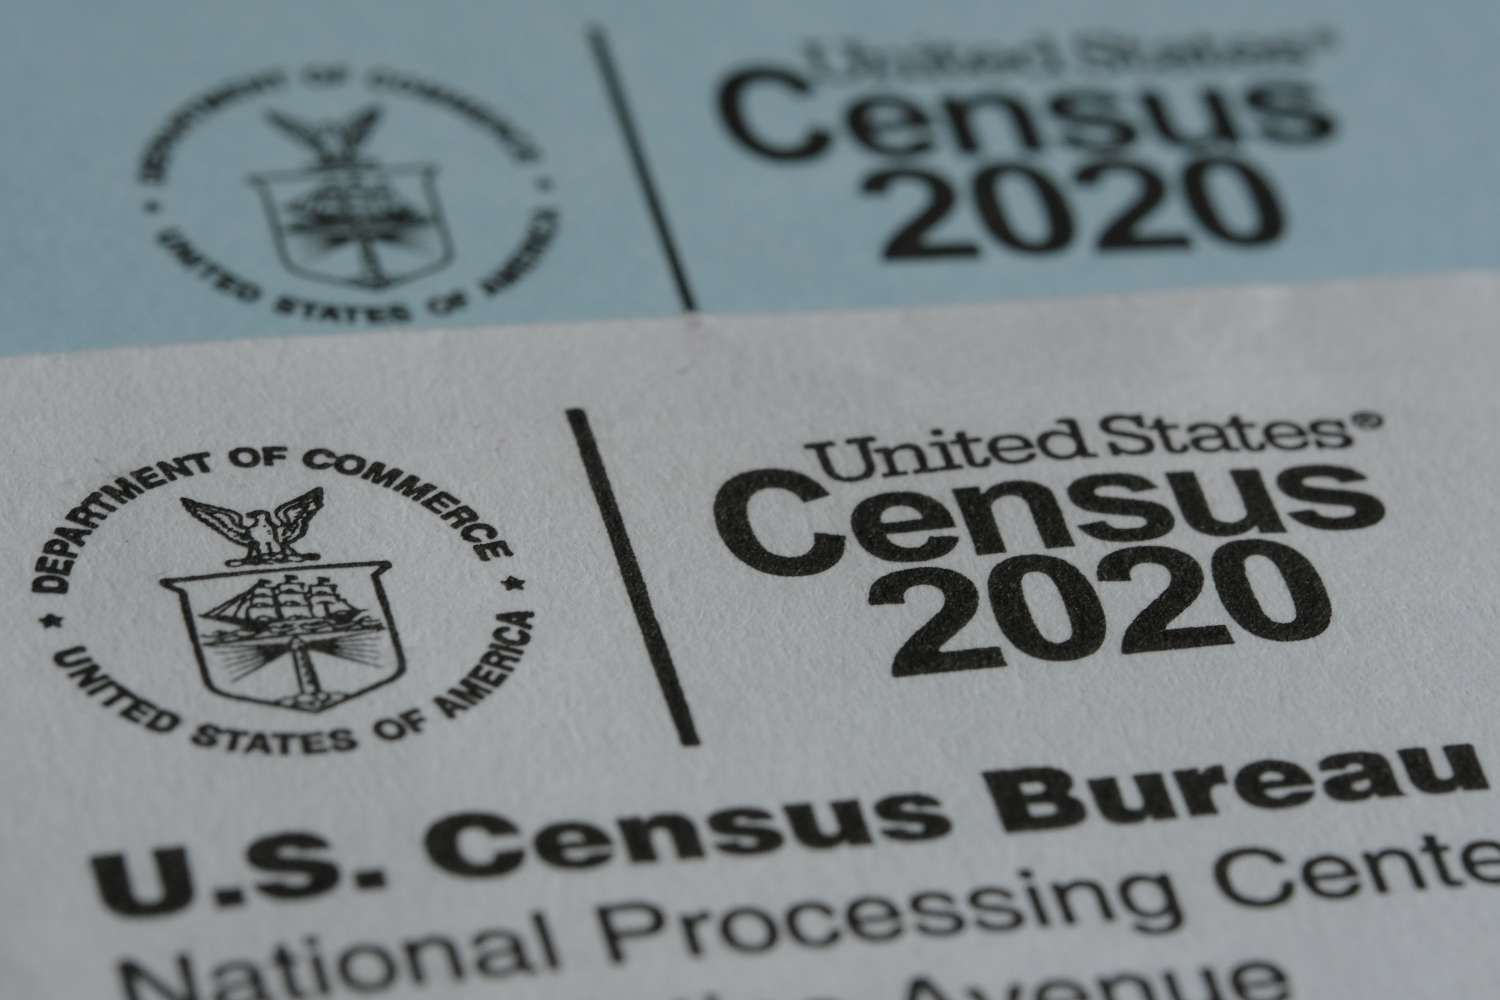 Mail containing information on the 2020 Census from the United States Census Bureau pictured in Portland, Ore., on April 6, 2020. (Photo by Alex Milan Tracy/Sipa USA)No Use UK. No Use Germany.